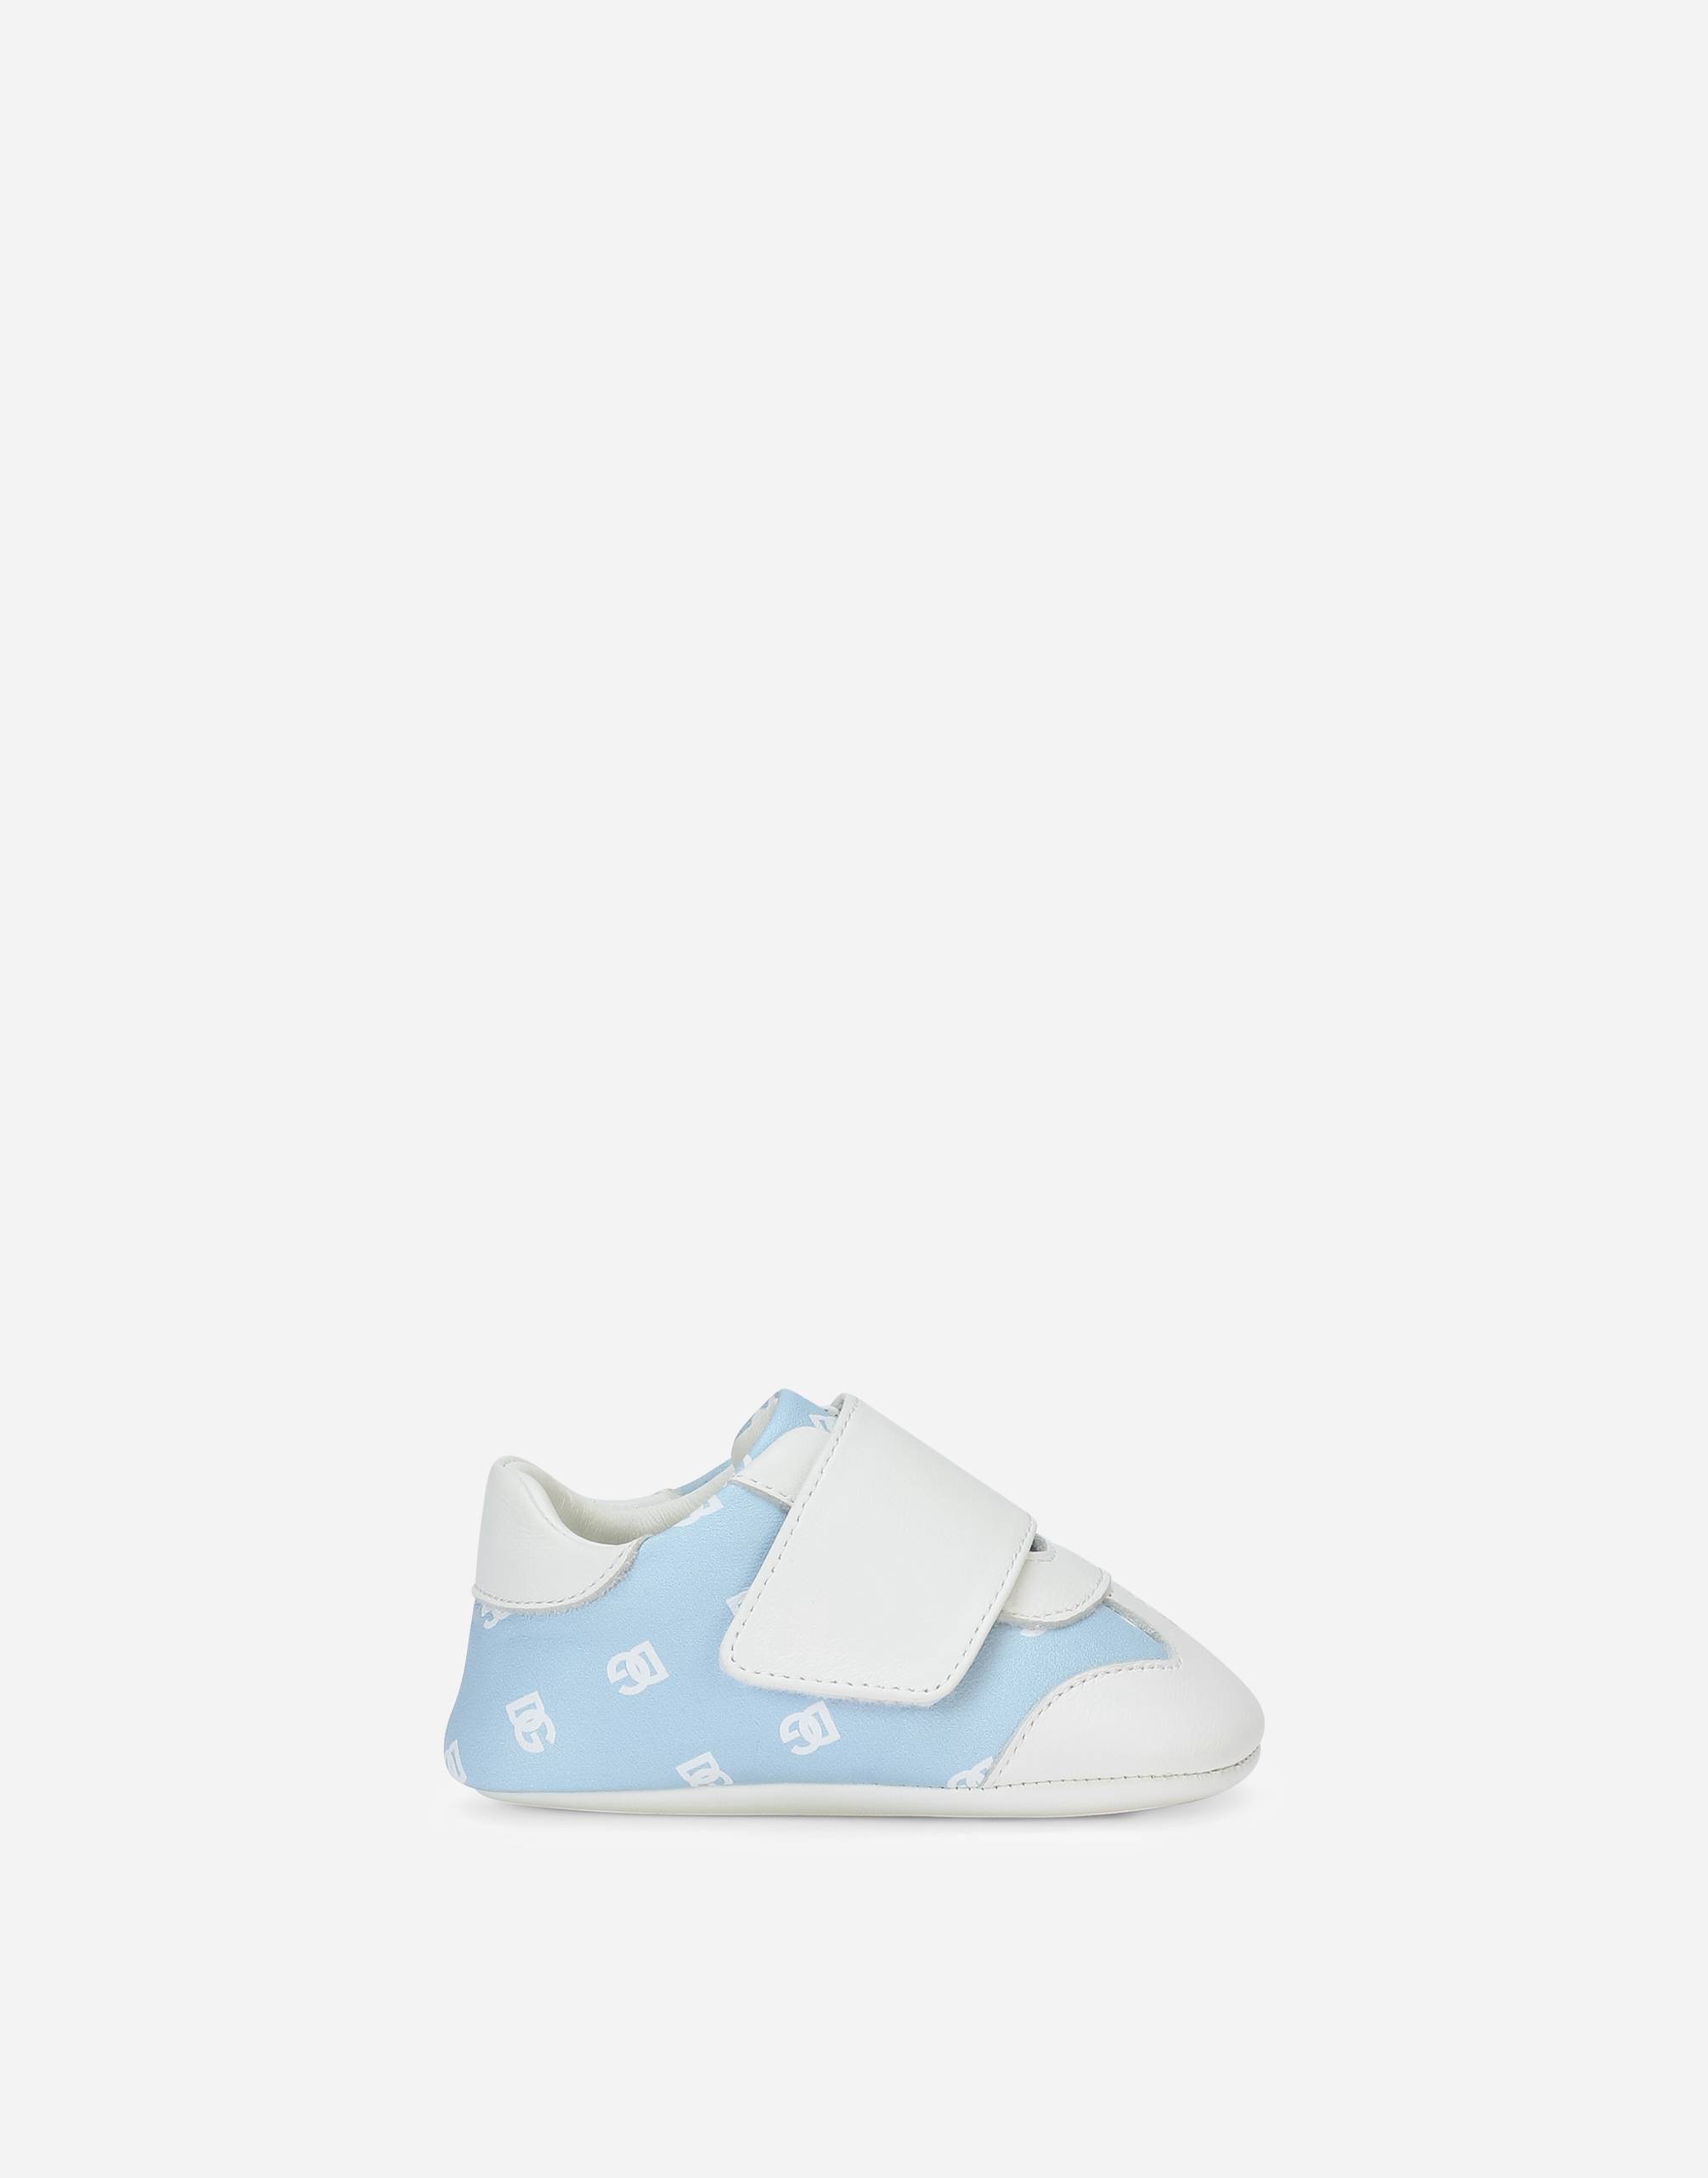 Dolce & Gabbana Babies' Nappa Leather Newborn Trainers With Dg-logo Print In Azure